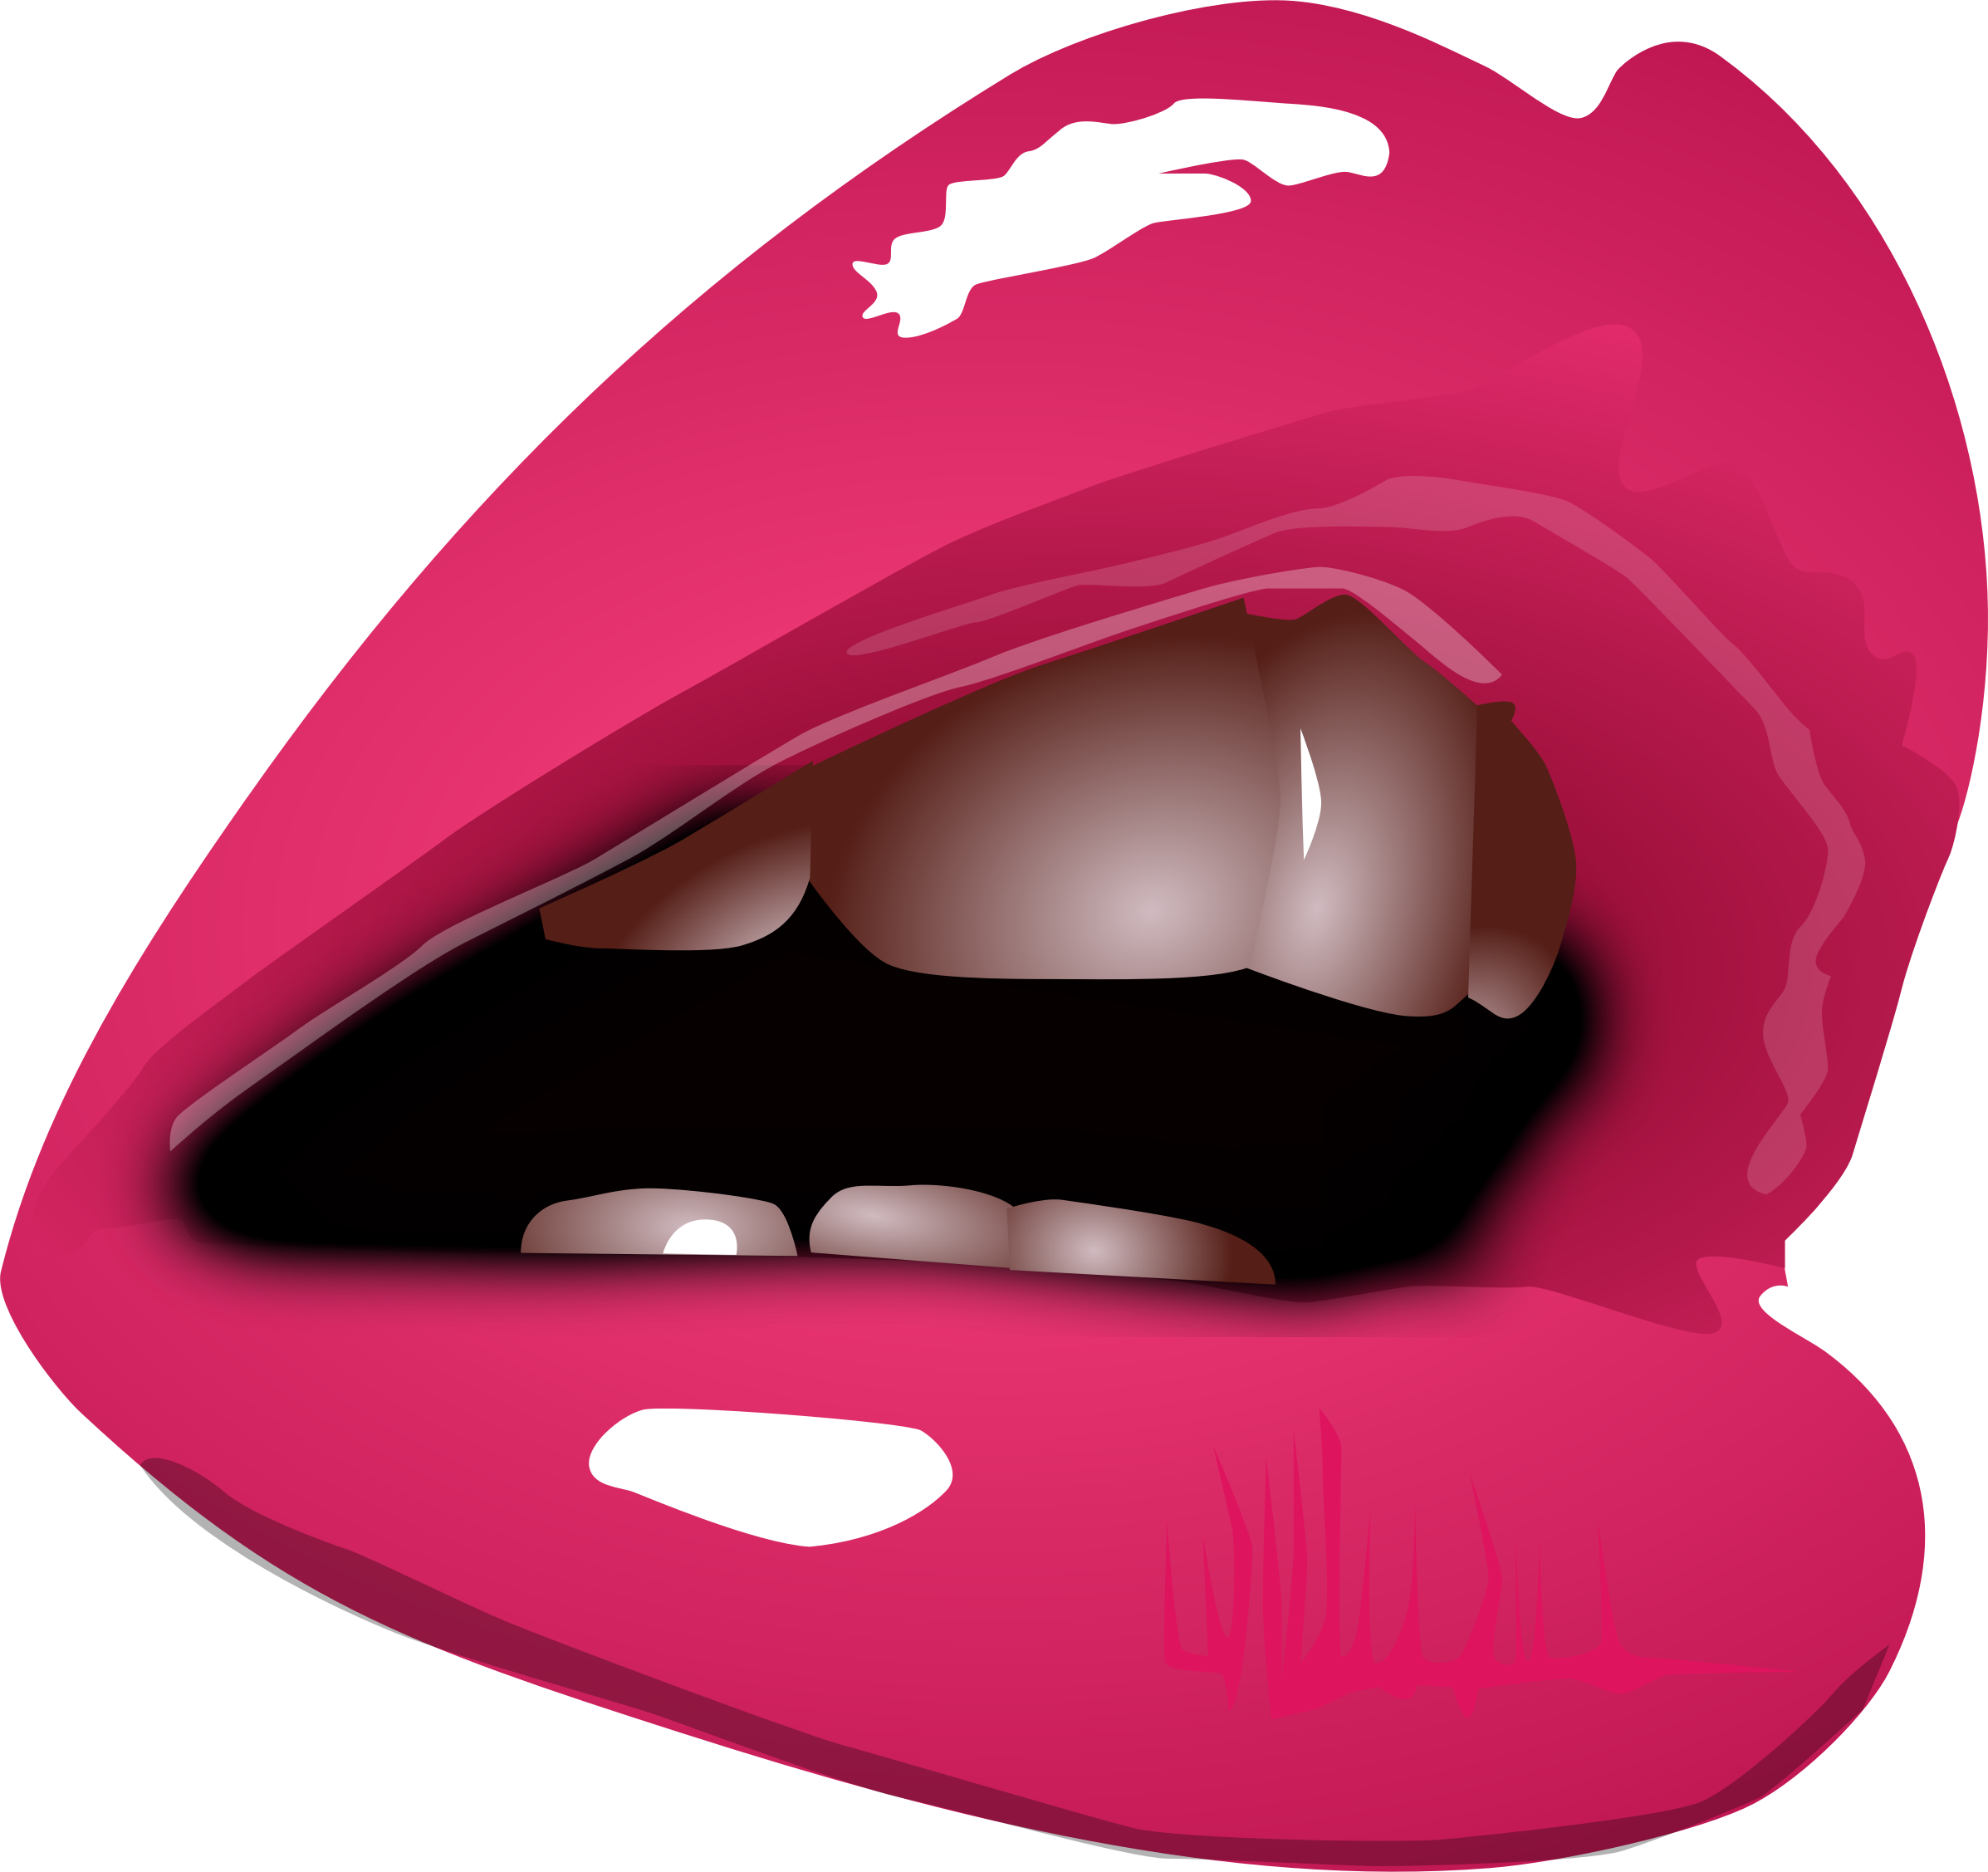 Mouth Talking PNG HD - 125517